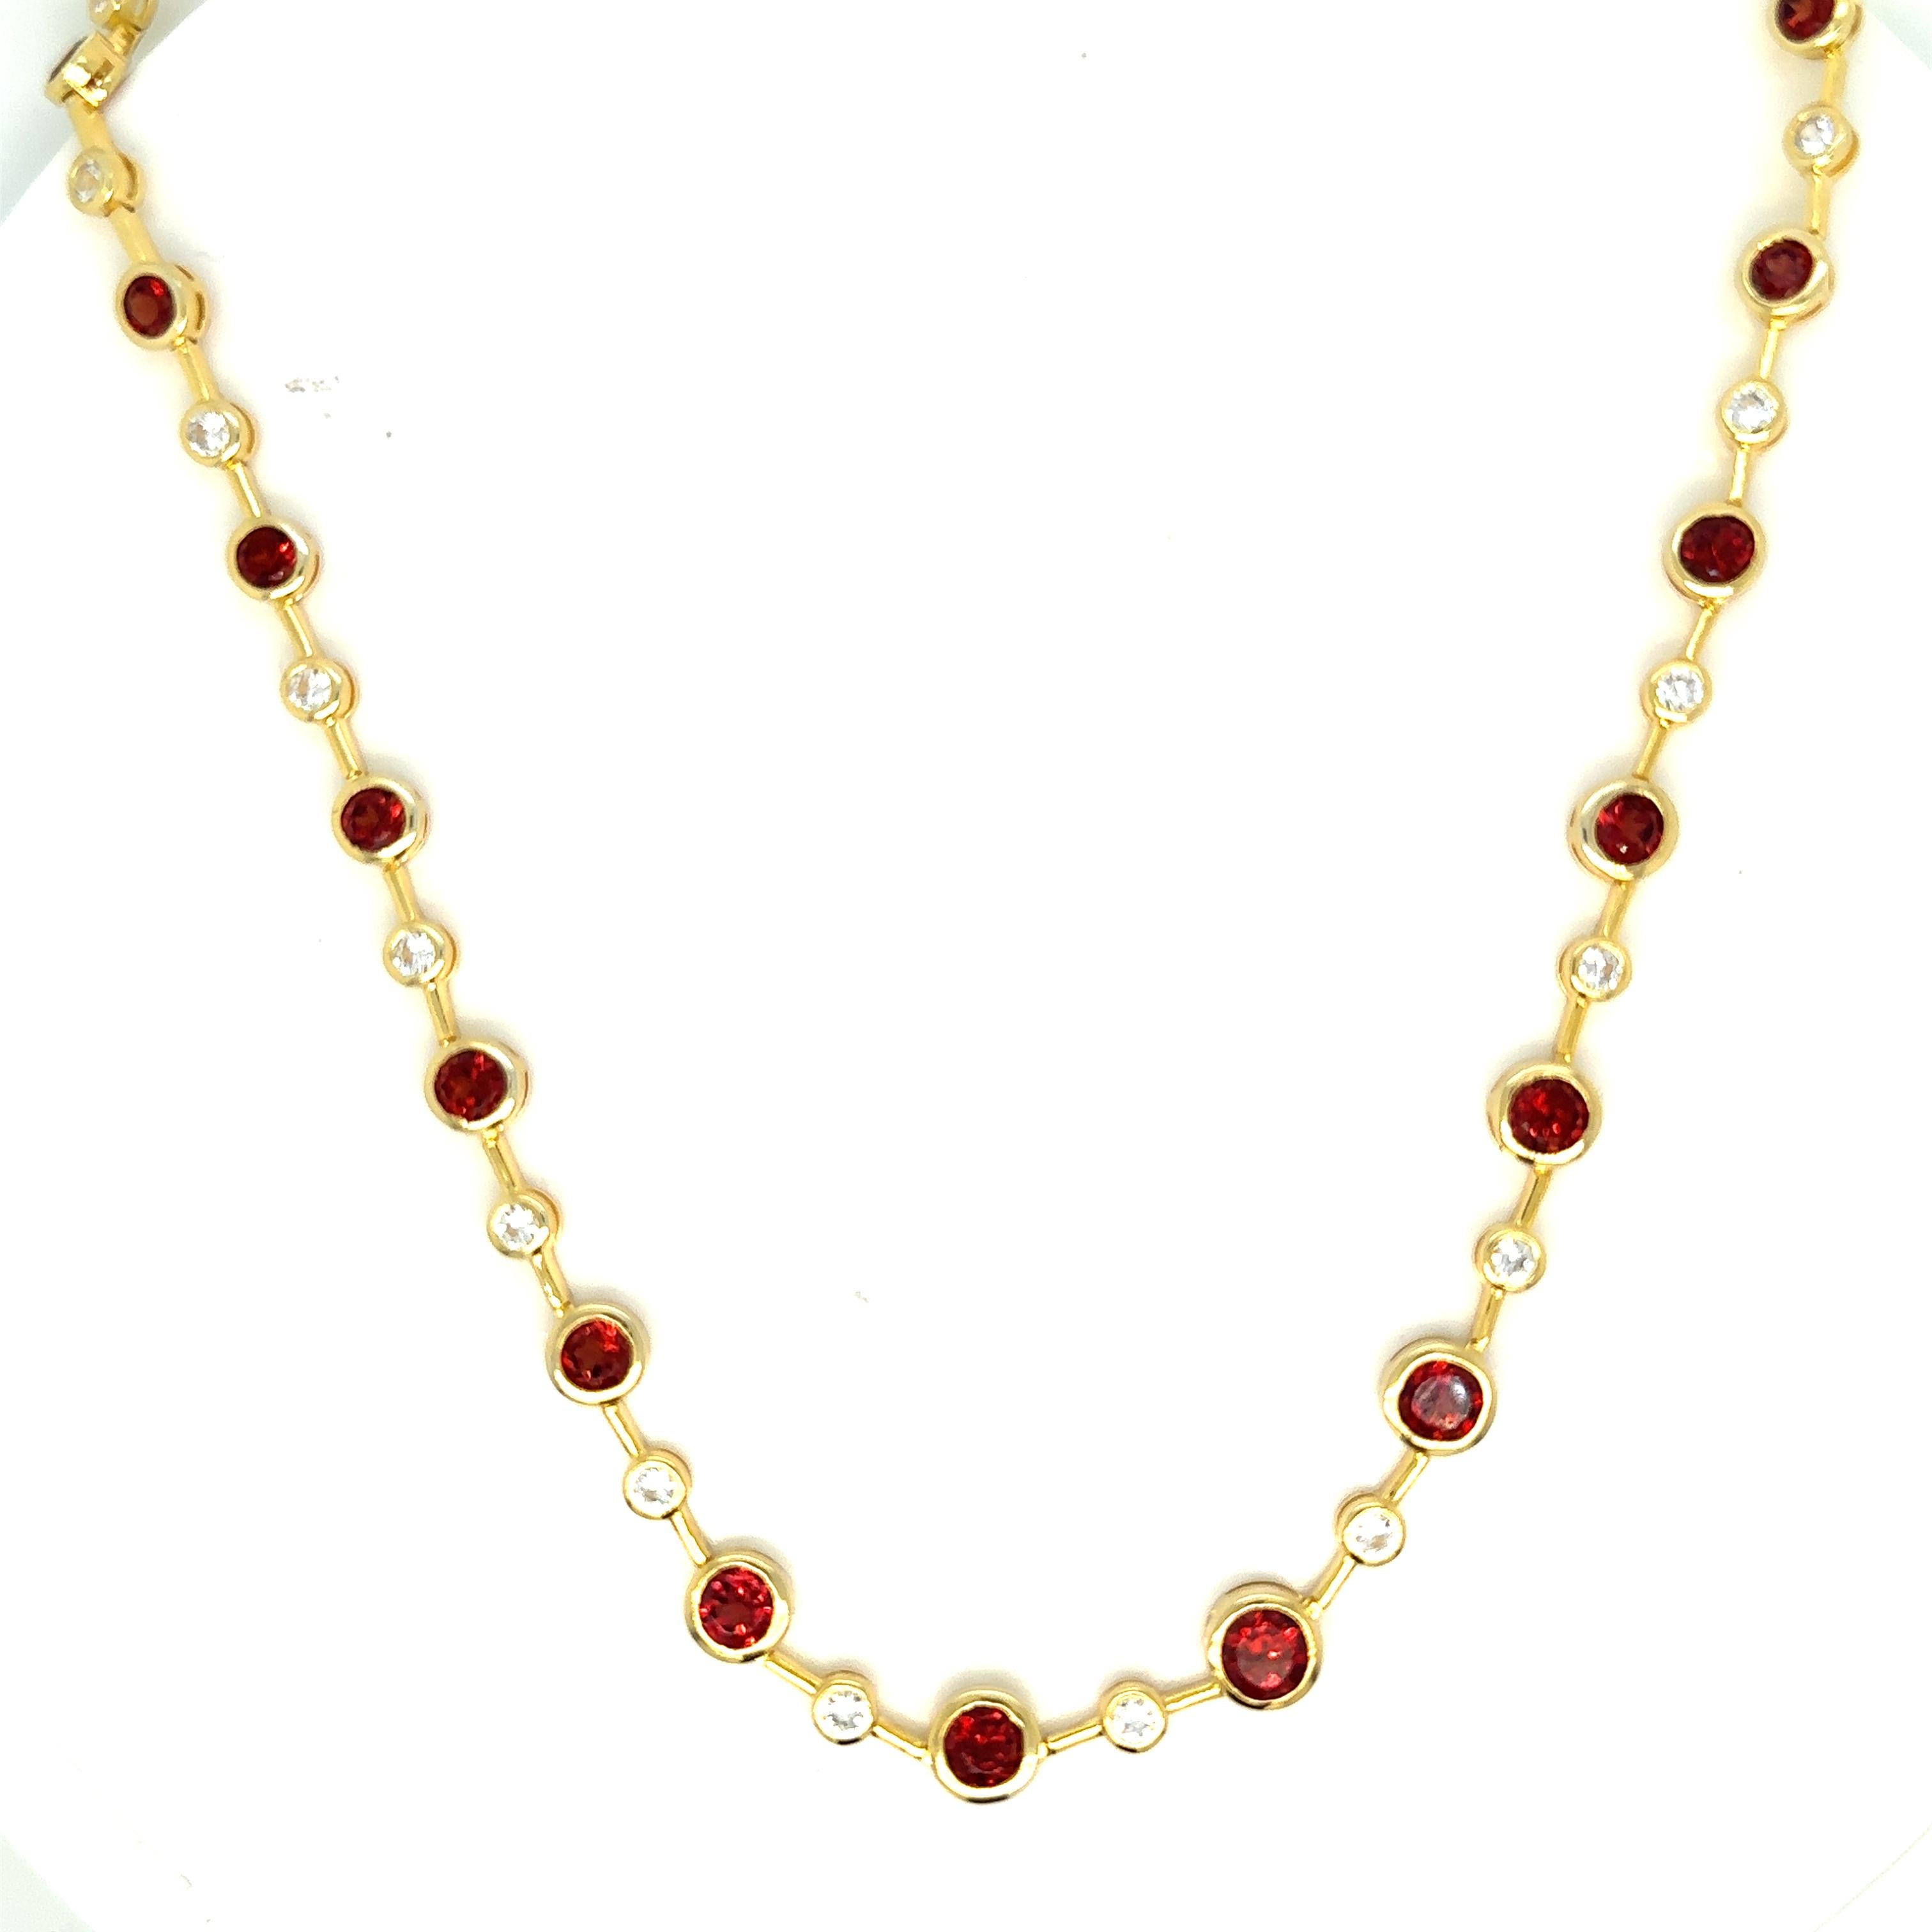 Elevate your style and adorn yourself with the timeless allure of our stunning Garnet White Sapphire necklace. 
With lustrous Garnet gemstones that reflect your unique personality, find the perfect piece that complements your individual beauty.